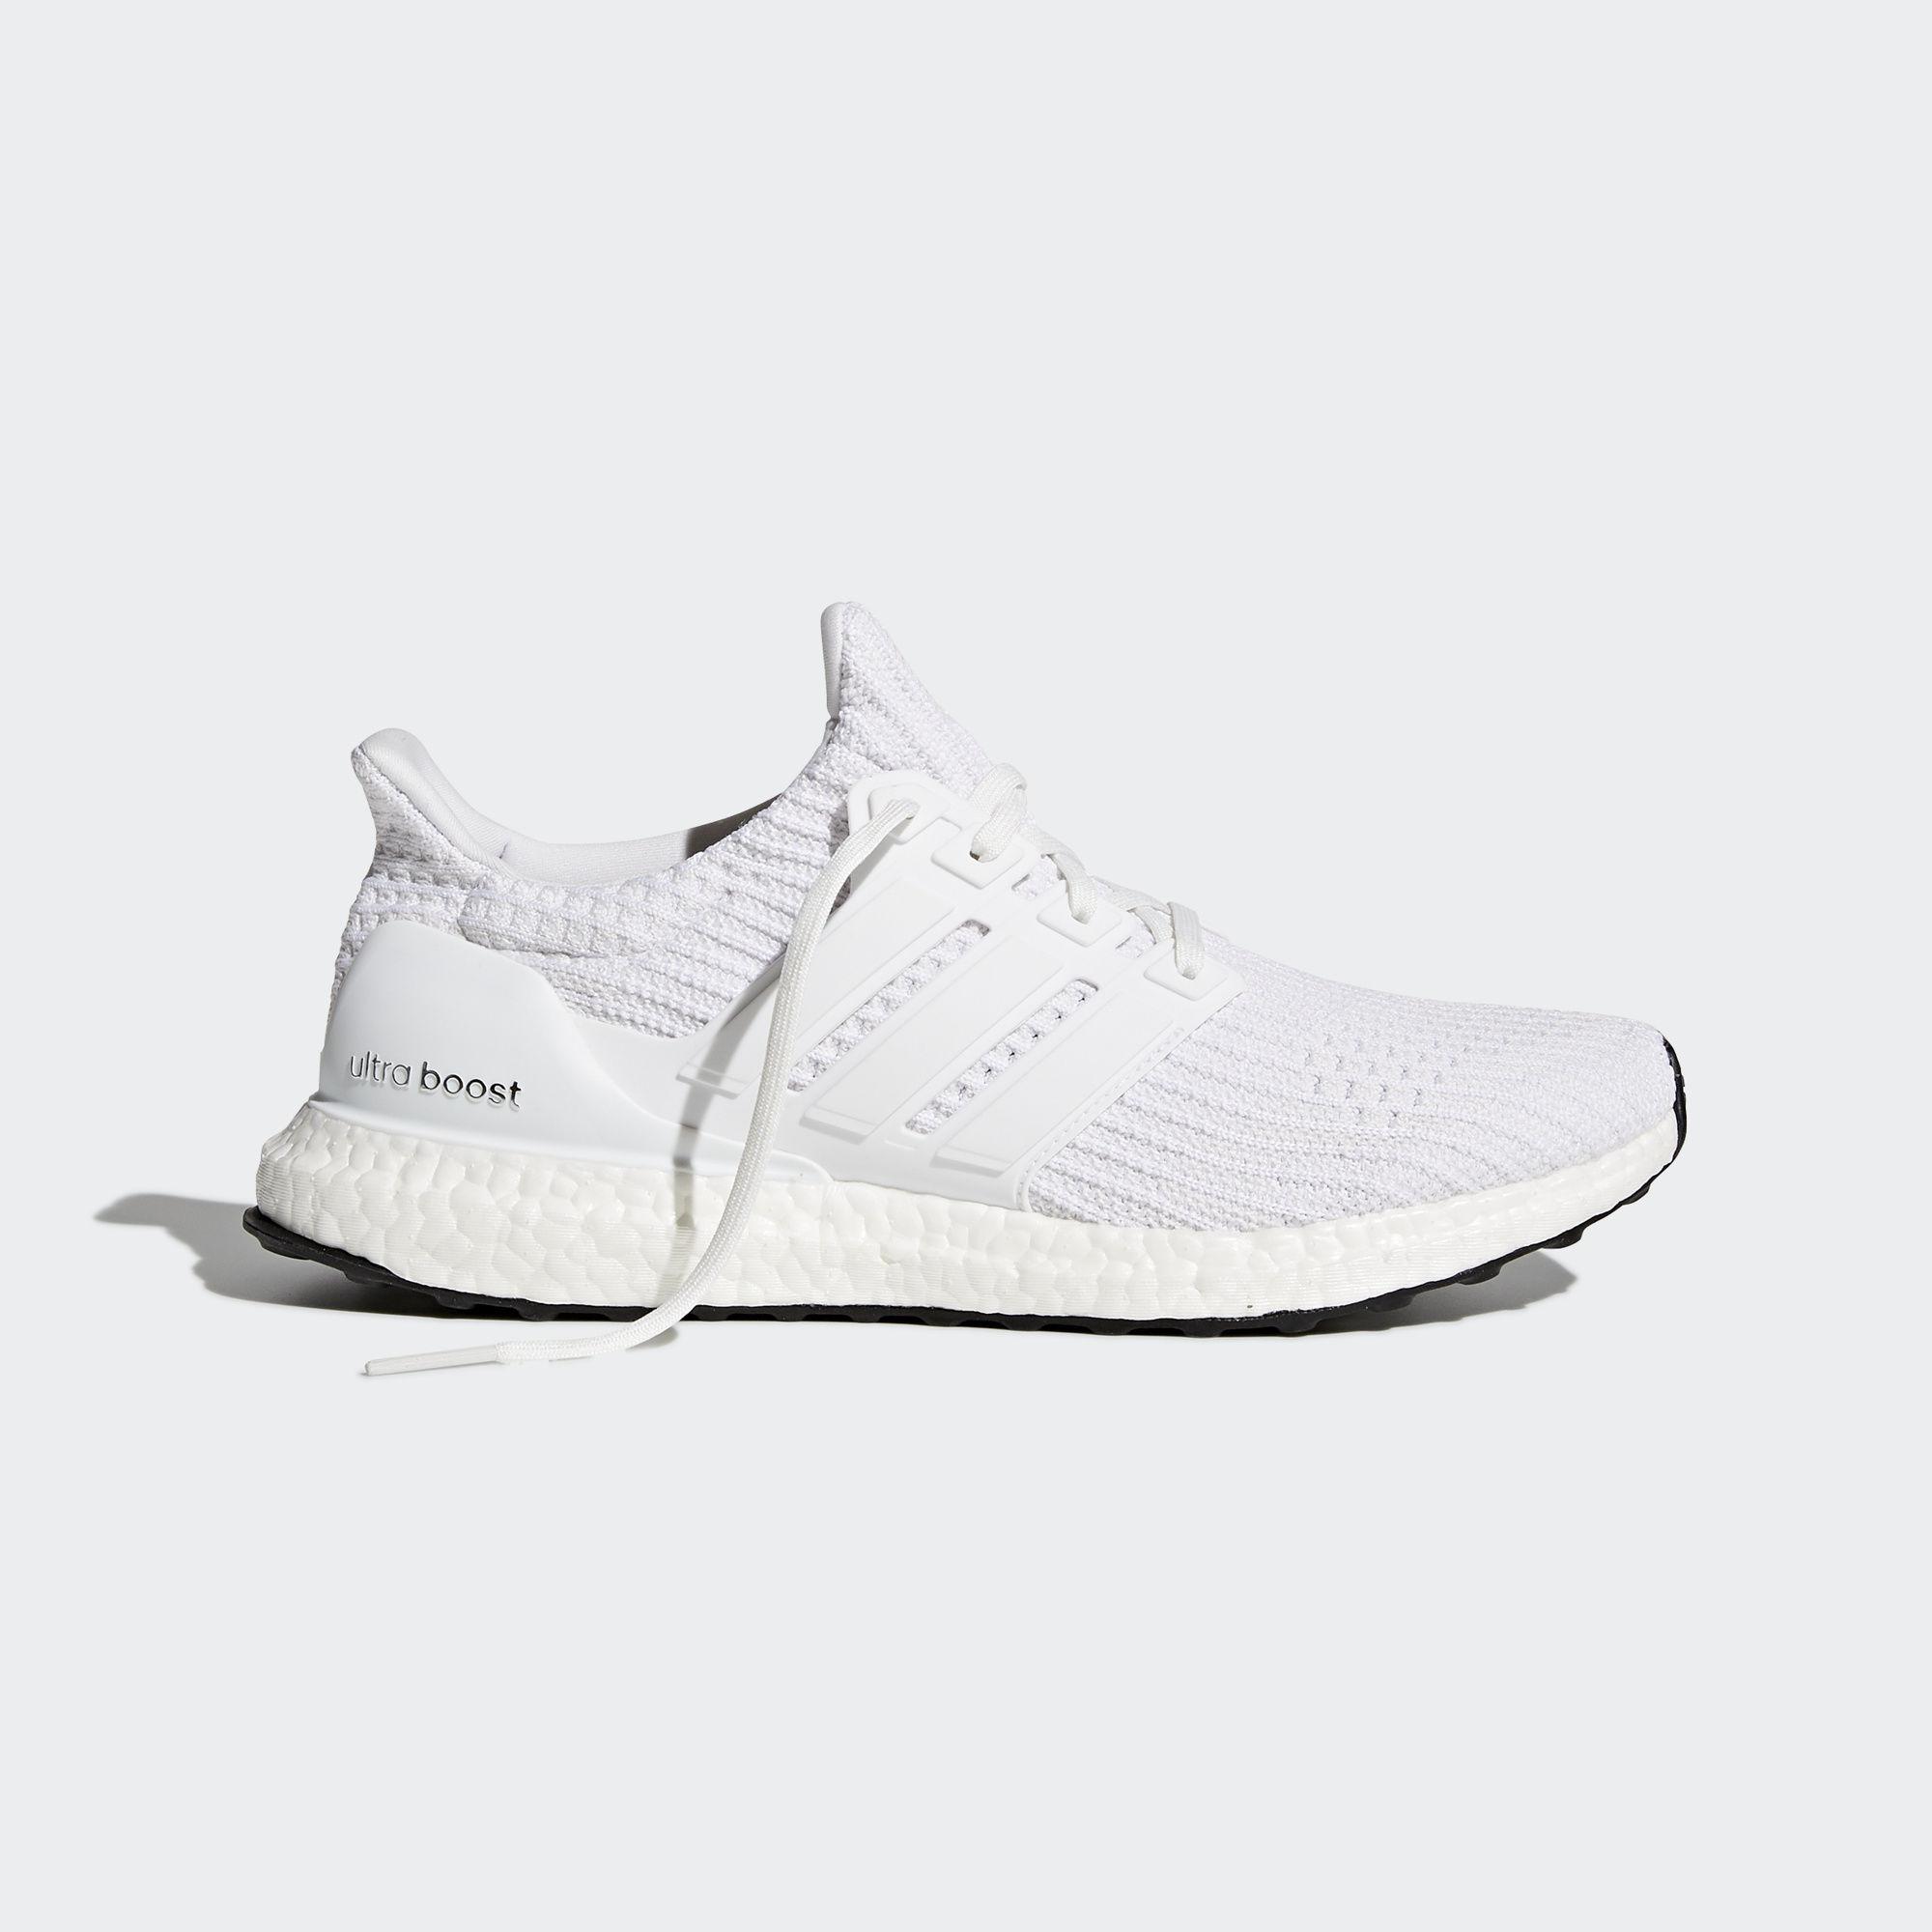  Adidas  Mens Ultra  Boost Running Shoes  White Black 